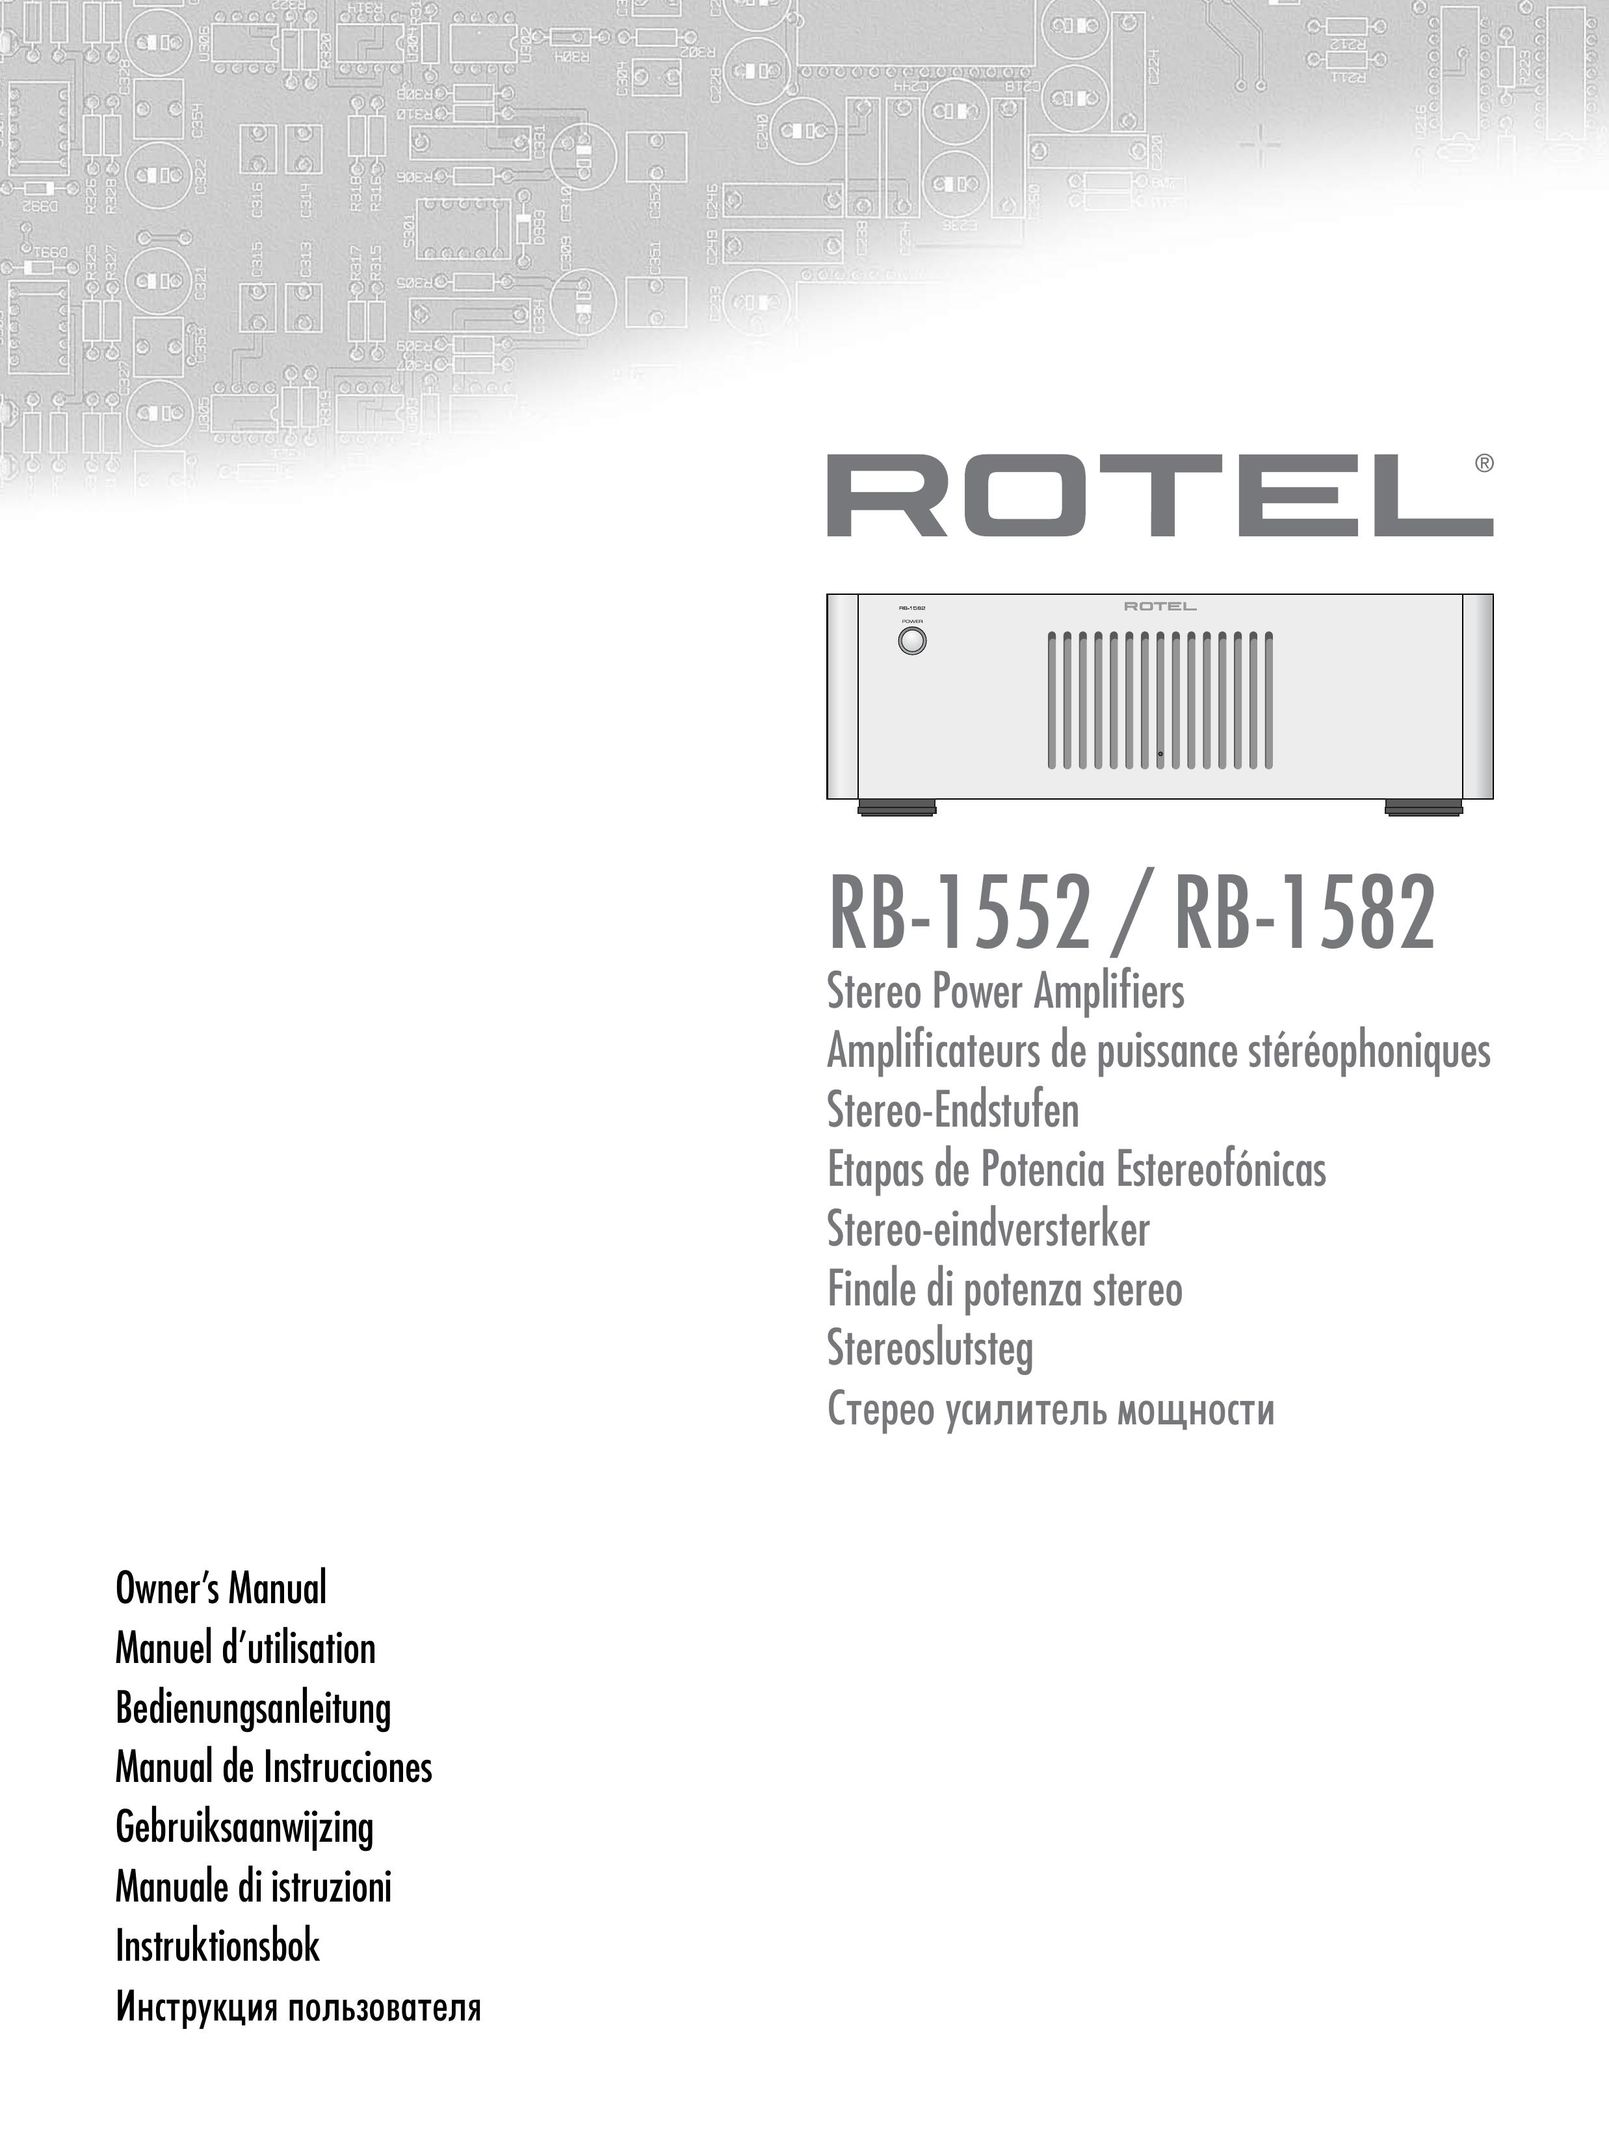 Rotel RB-1552 Stereo Amplifier User Manual